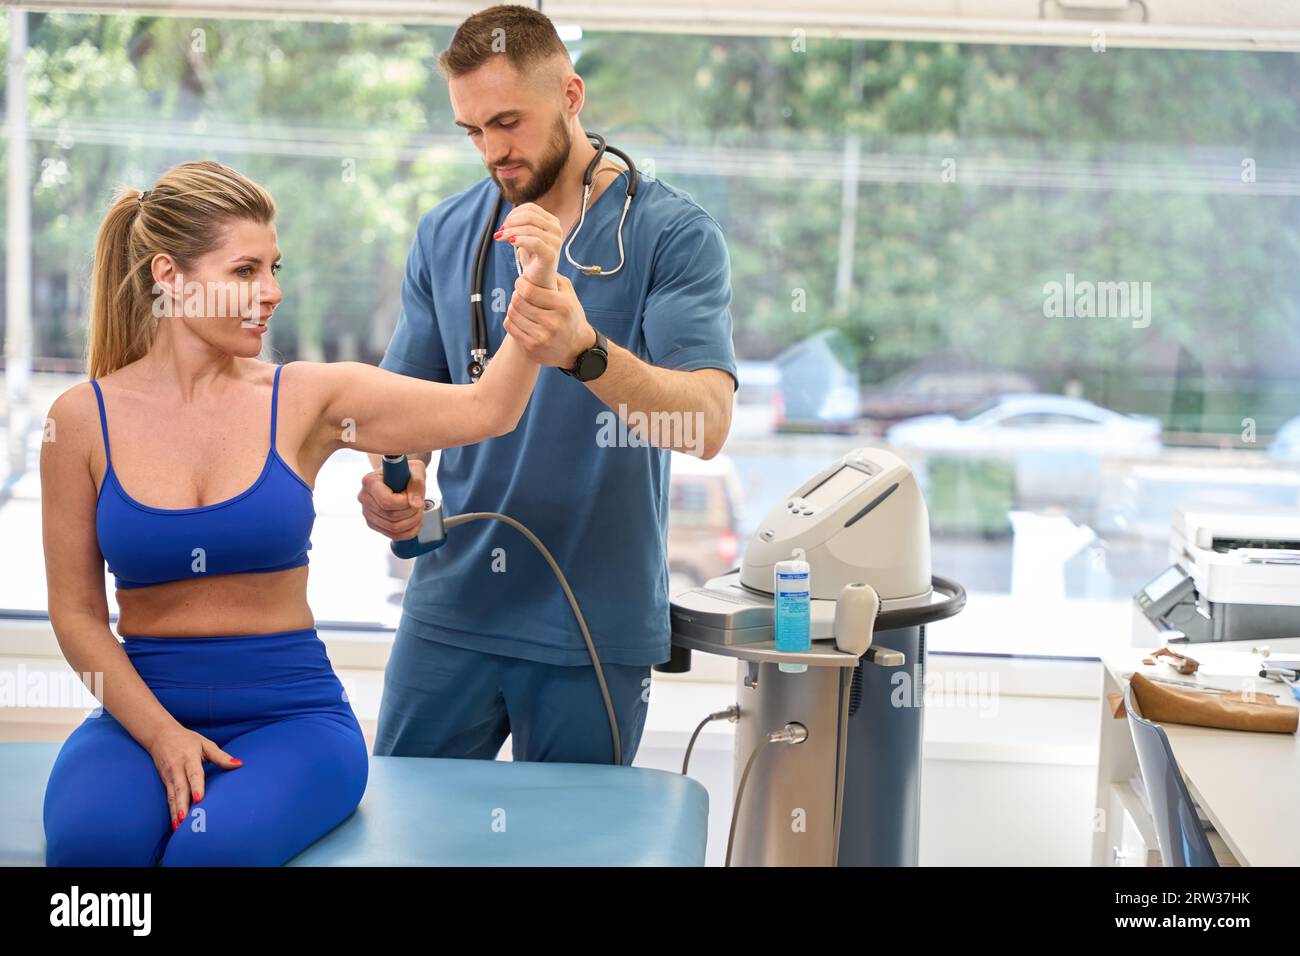 Skilled orthopedist performing trigger point therapy on female client forearm Stock Photo